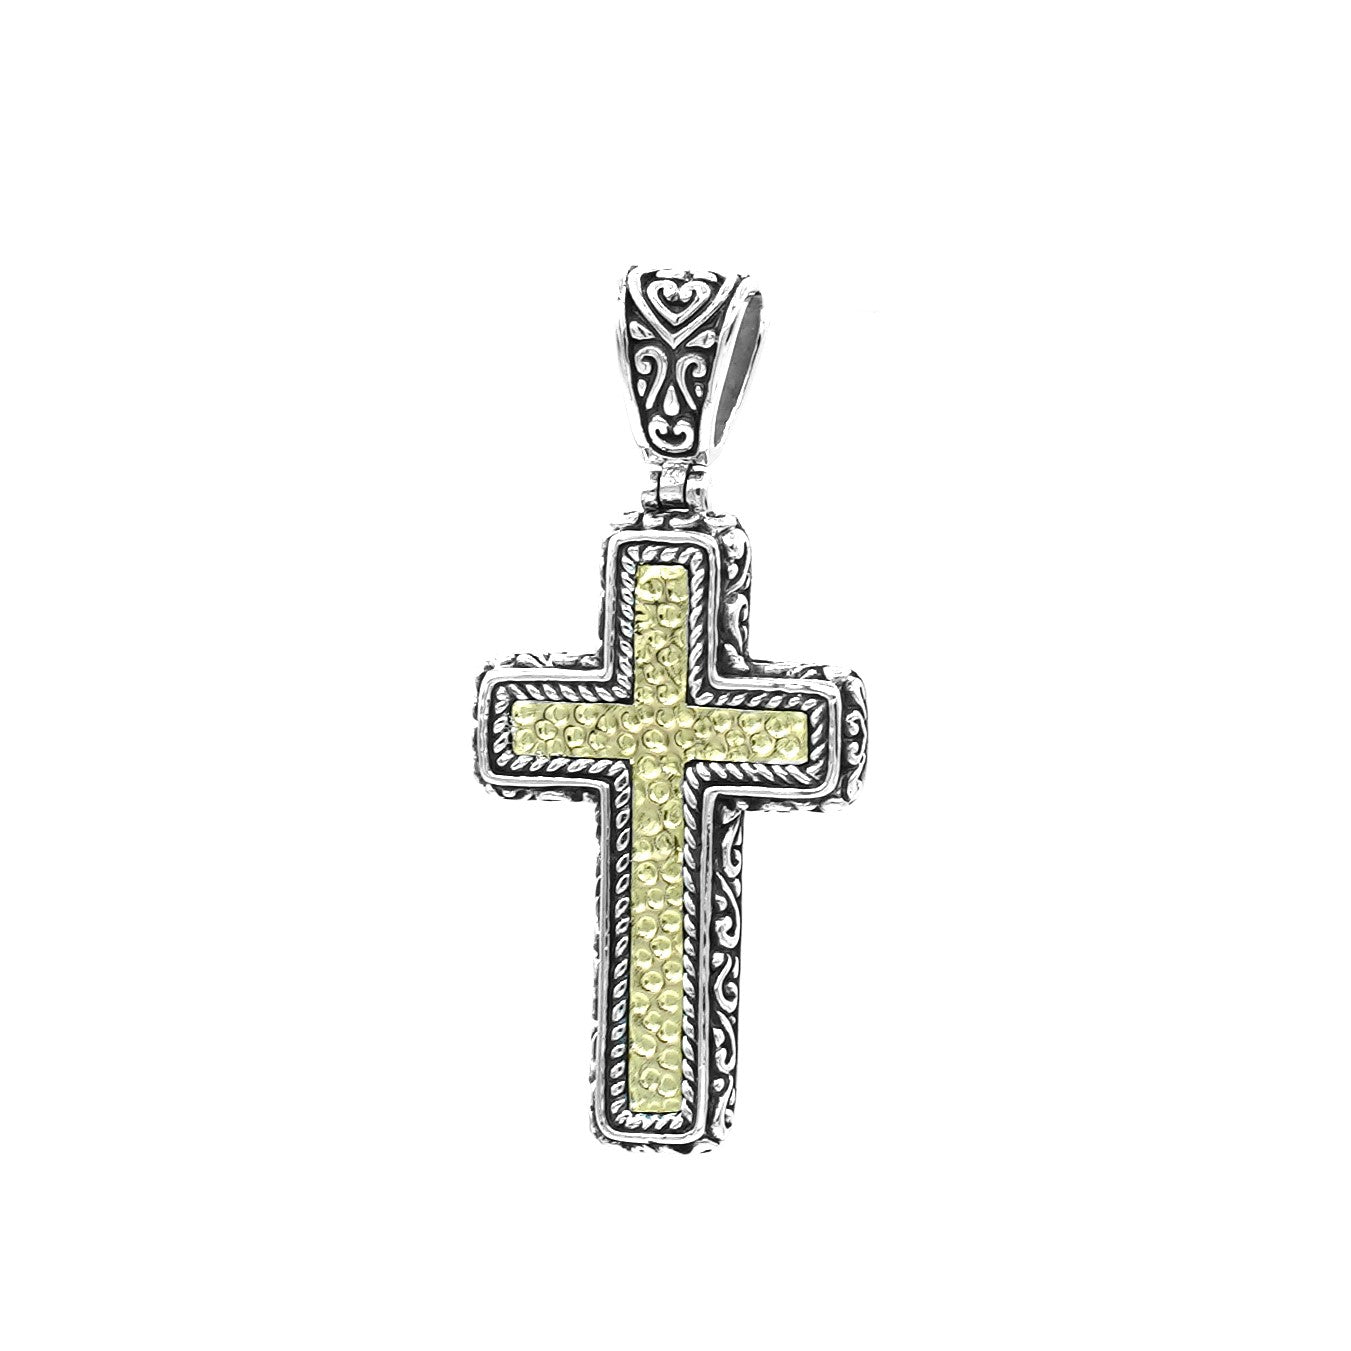 Samuel B Sterling Silver and Hammered 18K Yellow Gold Petite Reign Cross Pendant. Handcrafted in Bali by our skilled artisans. From our signature collection, Royal Bali™ featuring designs handcrafted using sterling silver and 18k yellow gold accents.